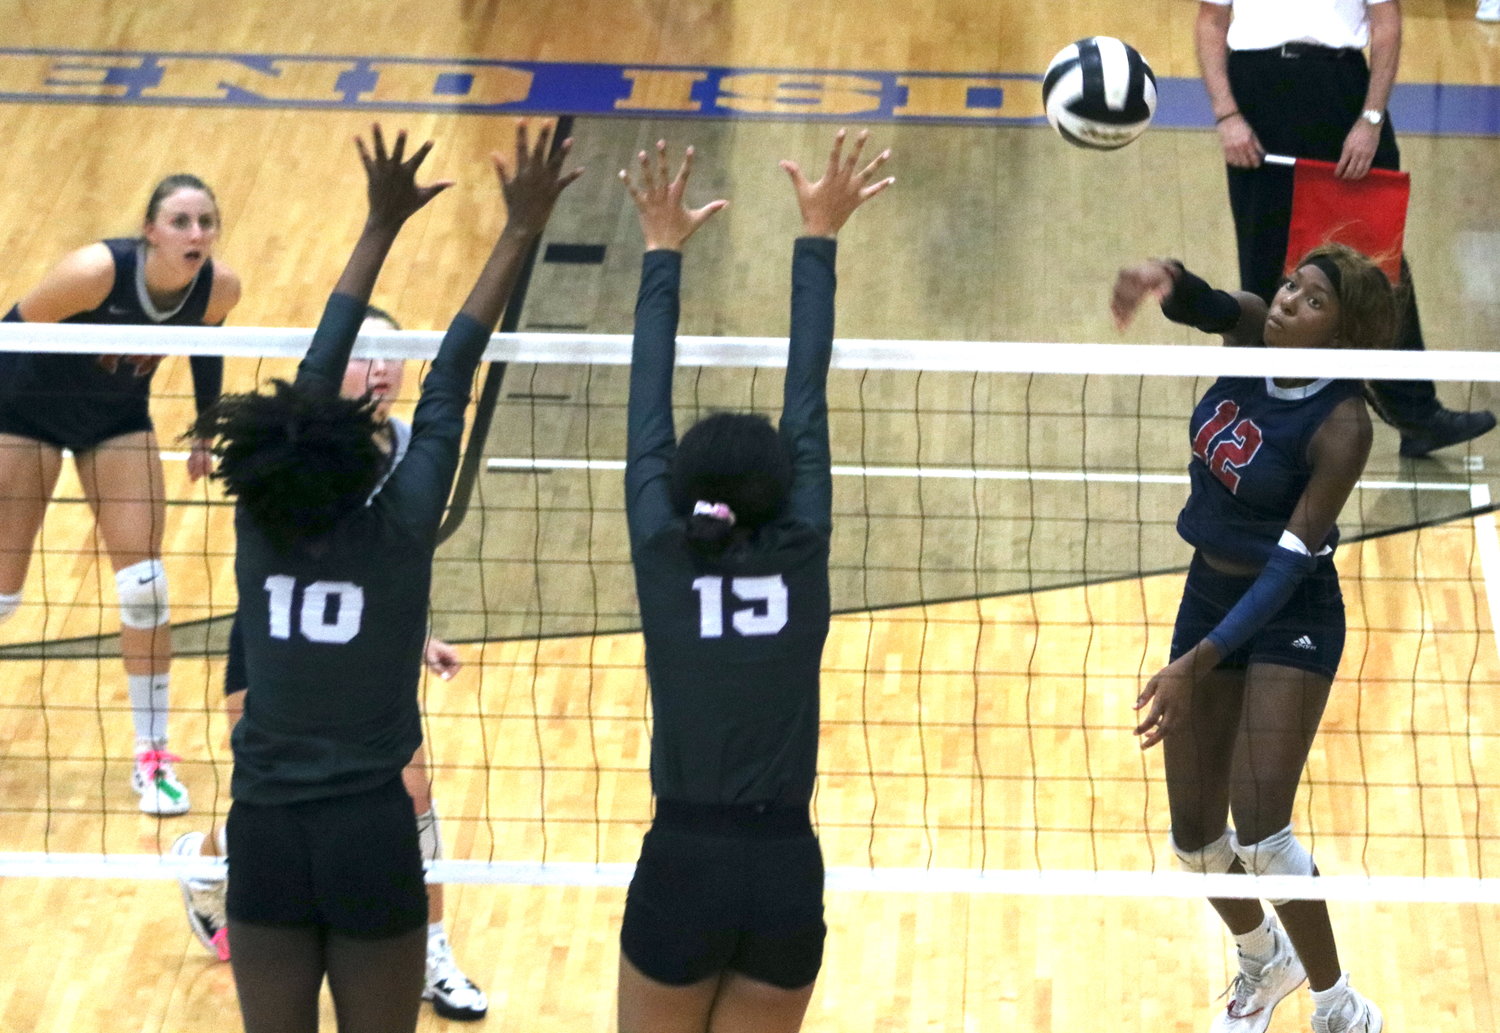 Tompkins Cindy Tchouangwa spikes a ball during Tuesday's match between Tompkins and Ridge Point at Wheeler Field House.